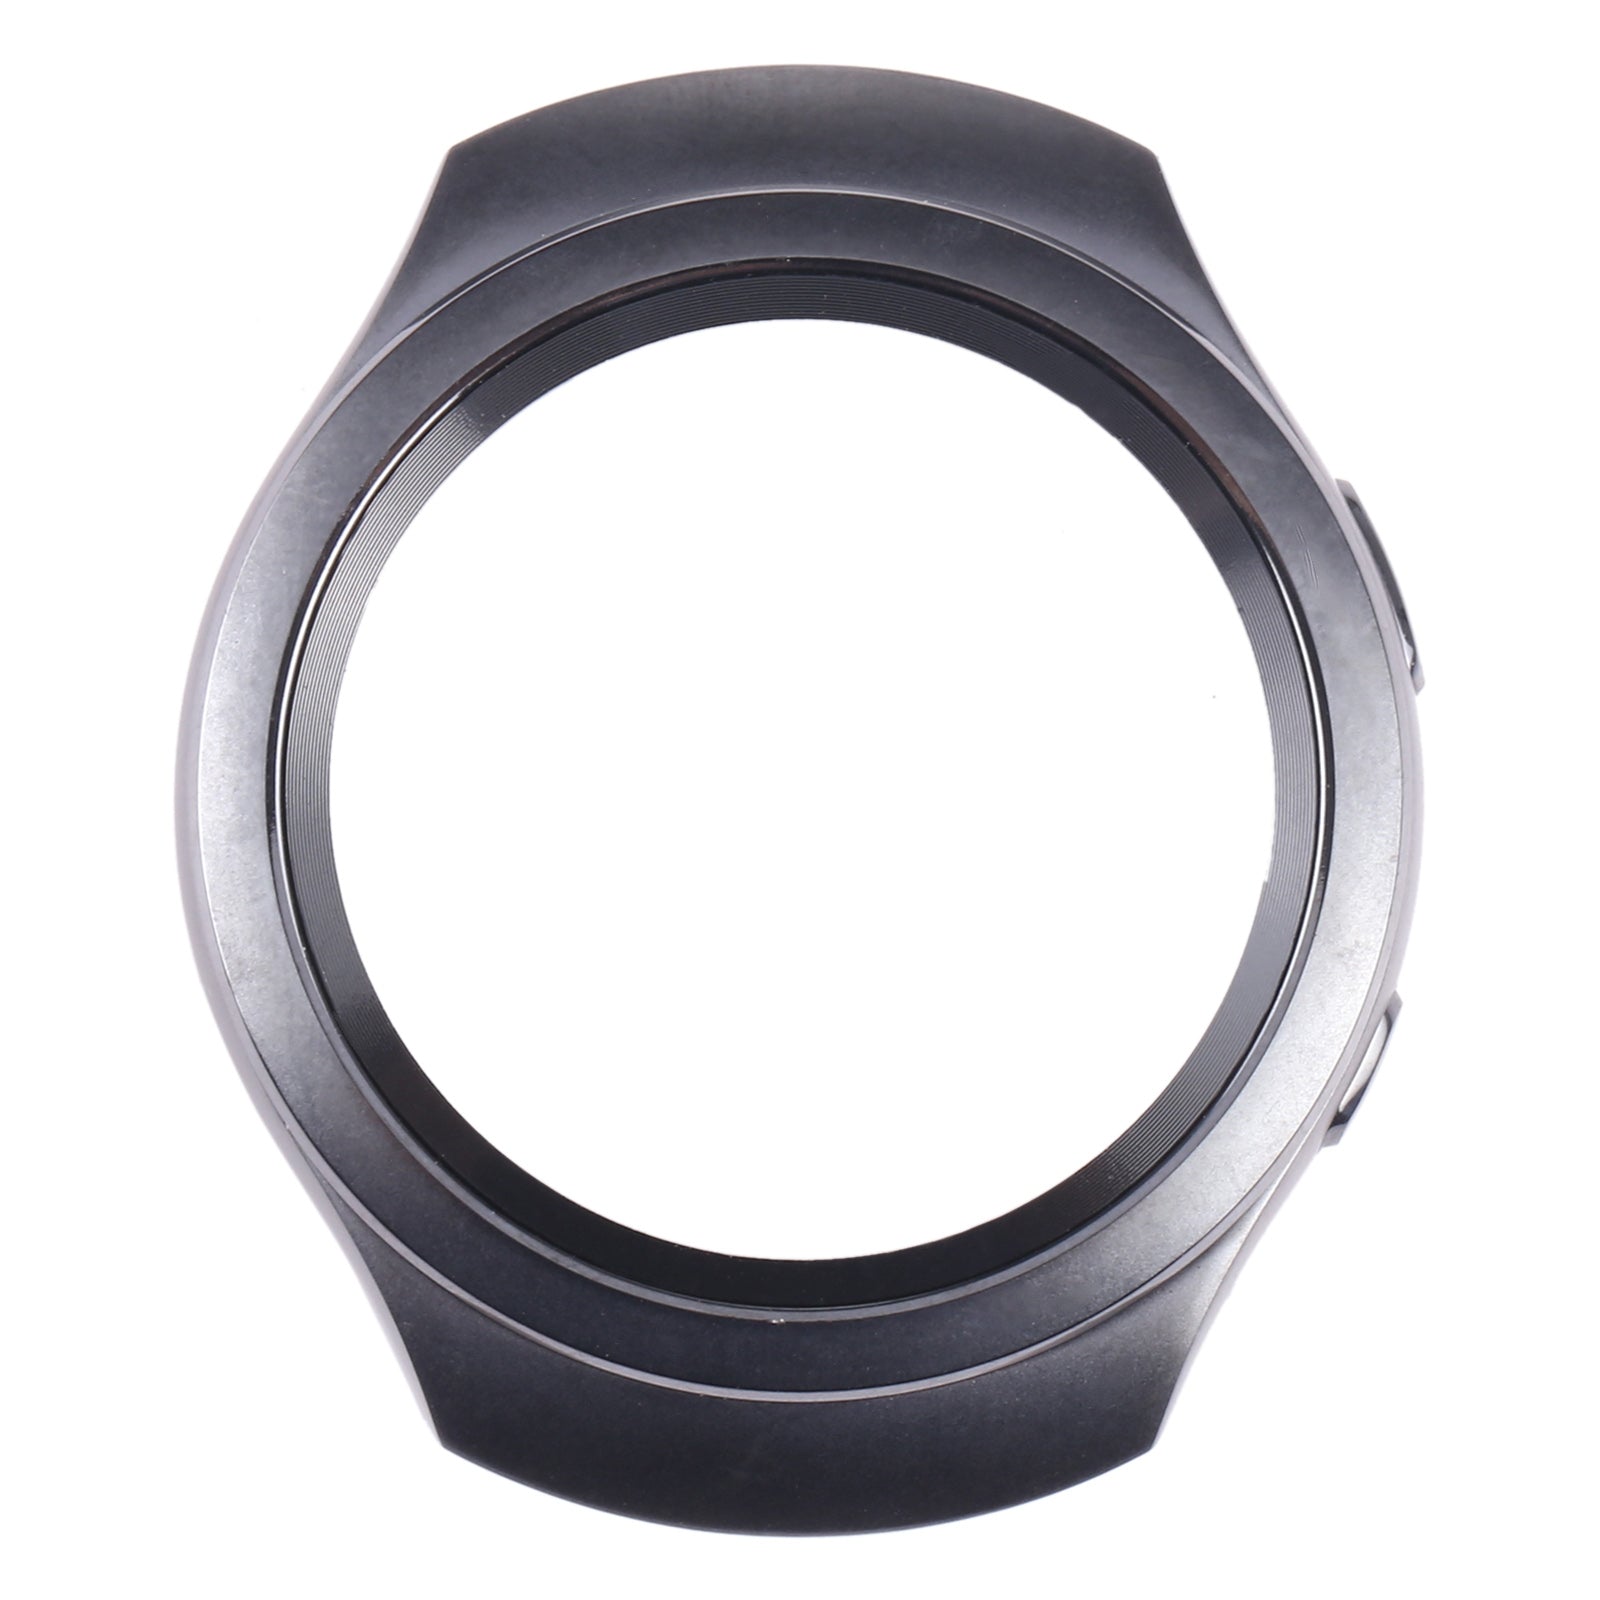 Chassis Front Frame Screen Samsung Galaxy Watch Gear S2 R720 Gray